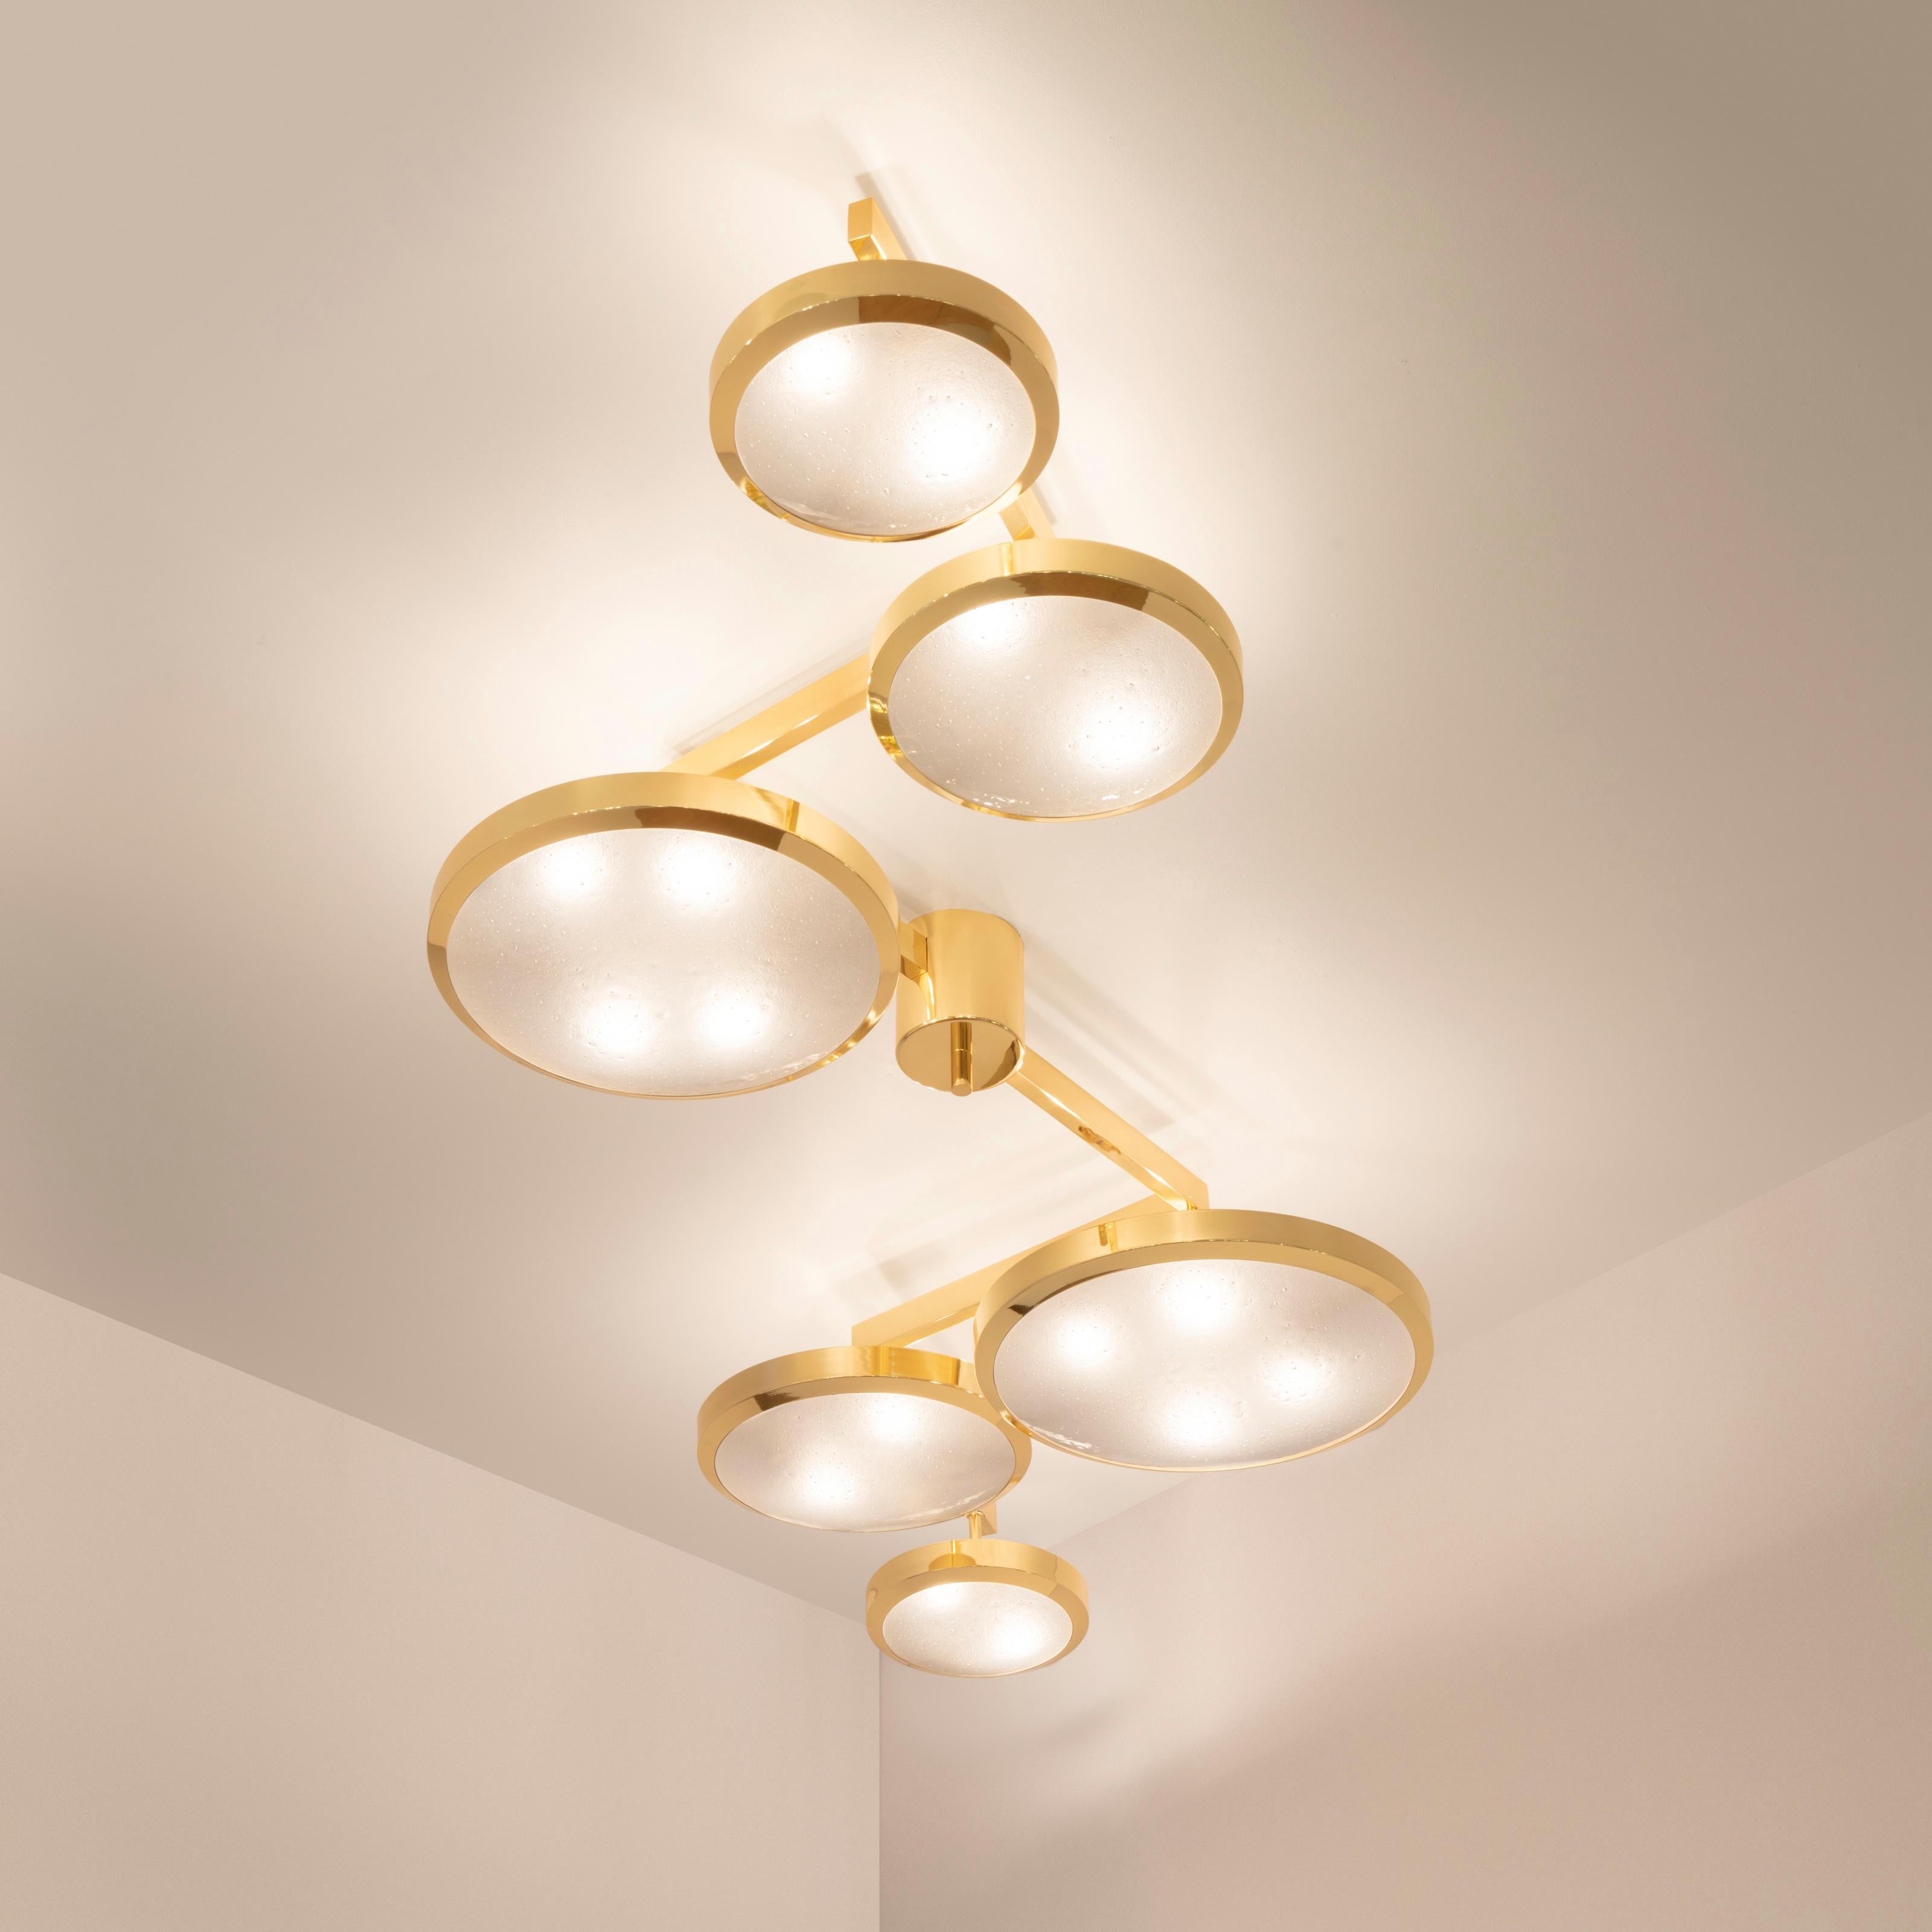 Translated in English to “suspended geometry”, the Geometria Sospesa ceiling light plays with the notion of lines and shapes. The concept is brought to life by its distinctive winding frame with six variable size shades at staggered heights. The